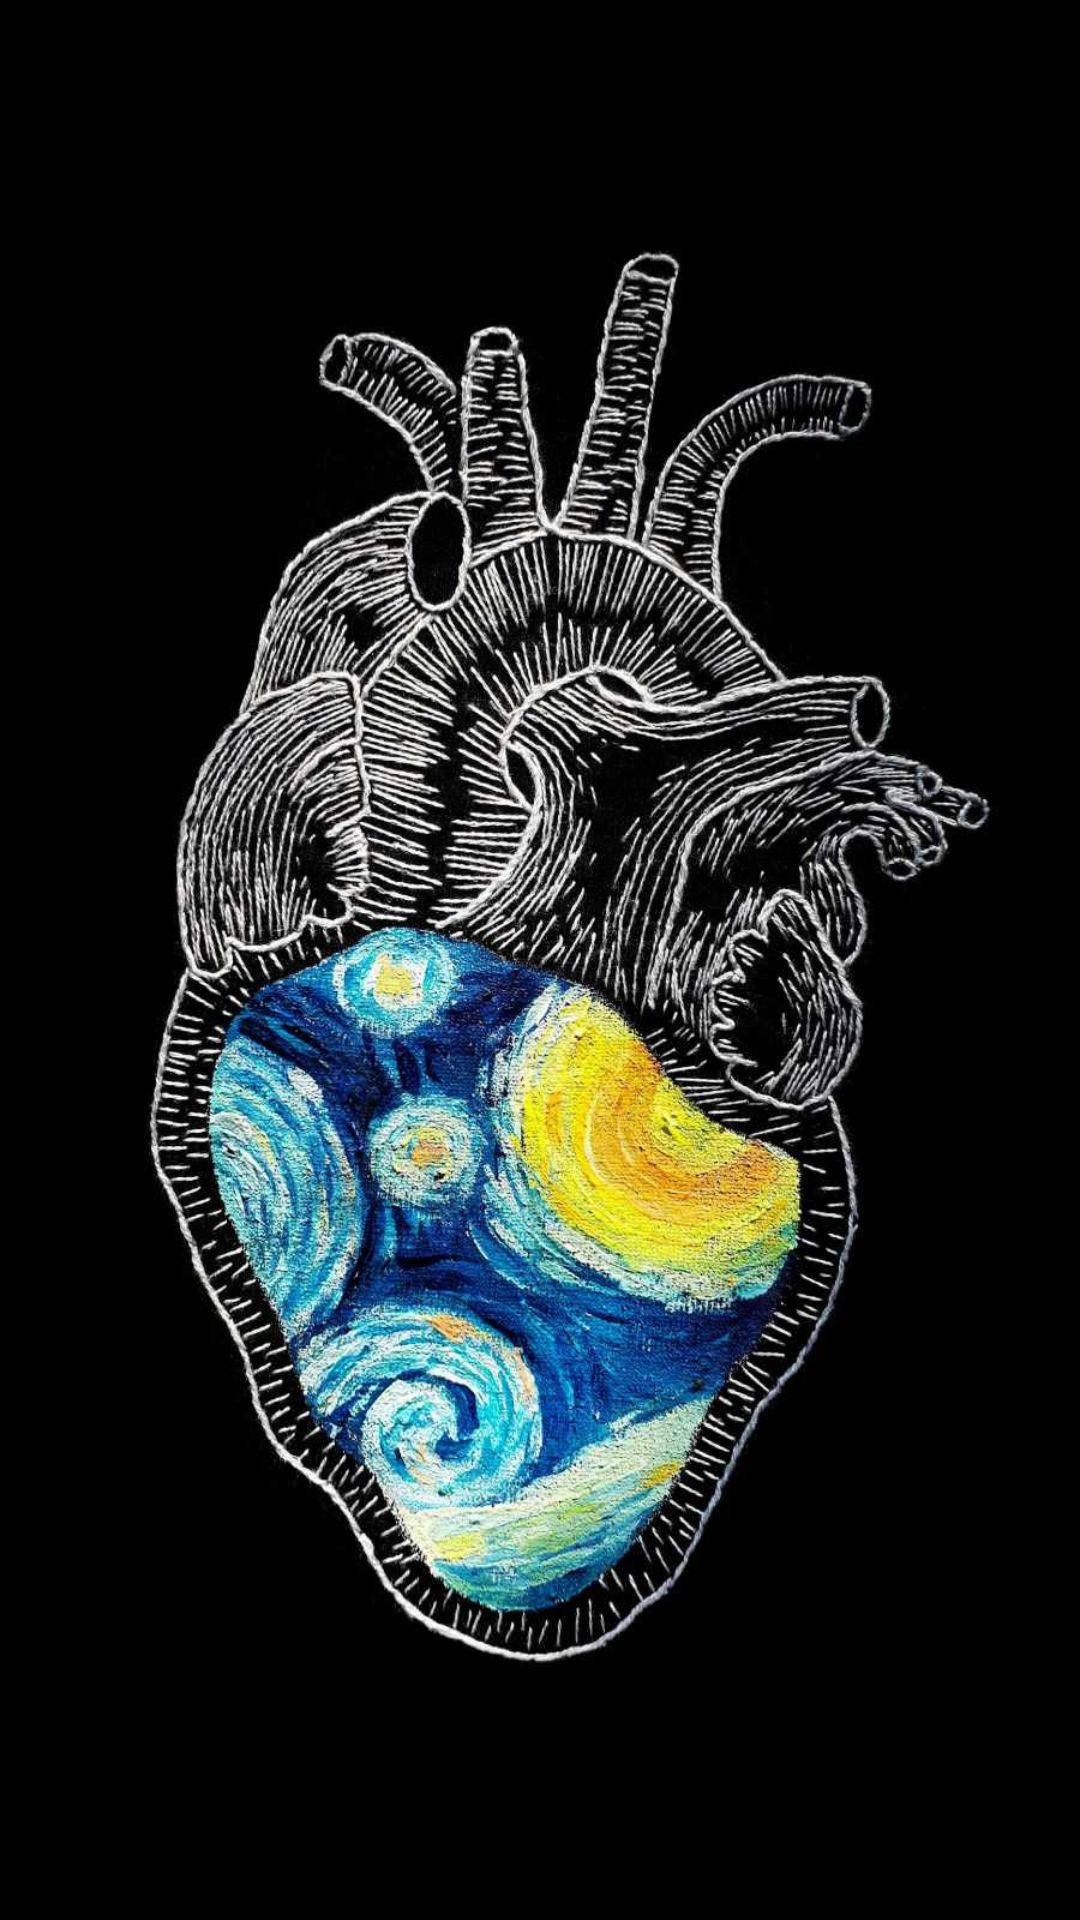 Black Heart With Starry Night